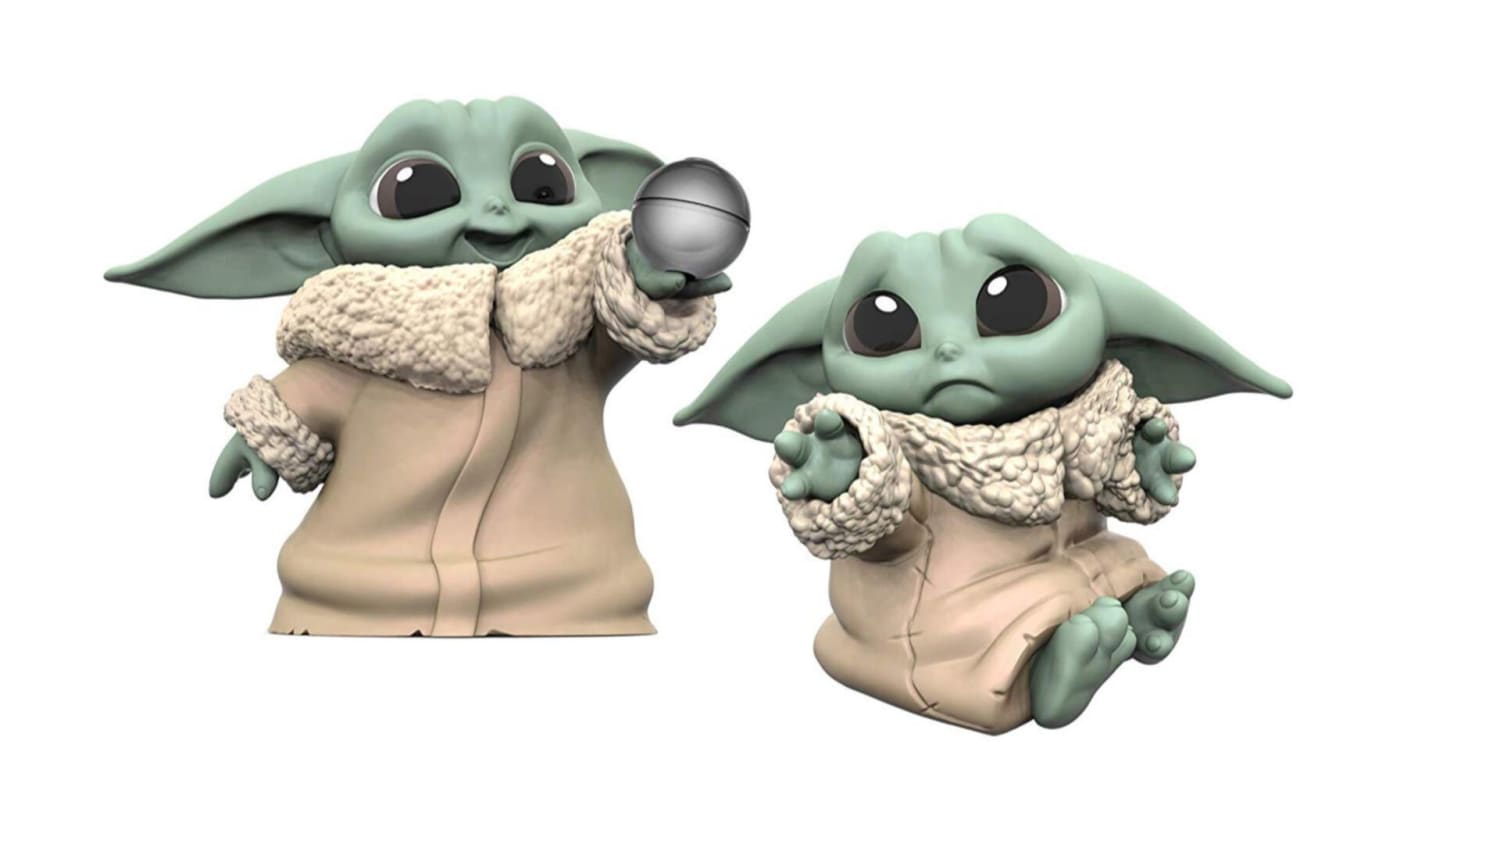 Baby Yoda toys, shirts and more let you bring the cute Disney Plus breakout star home